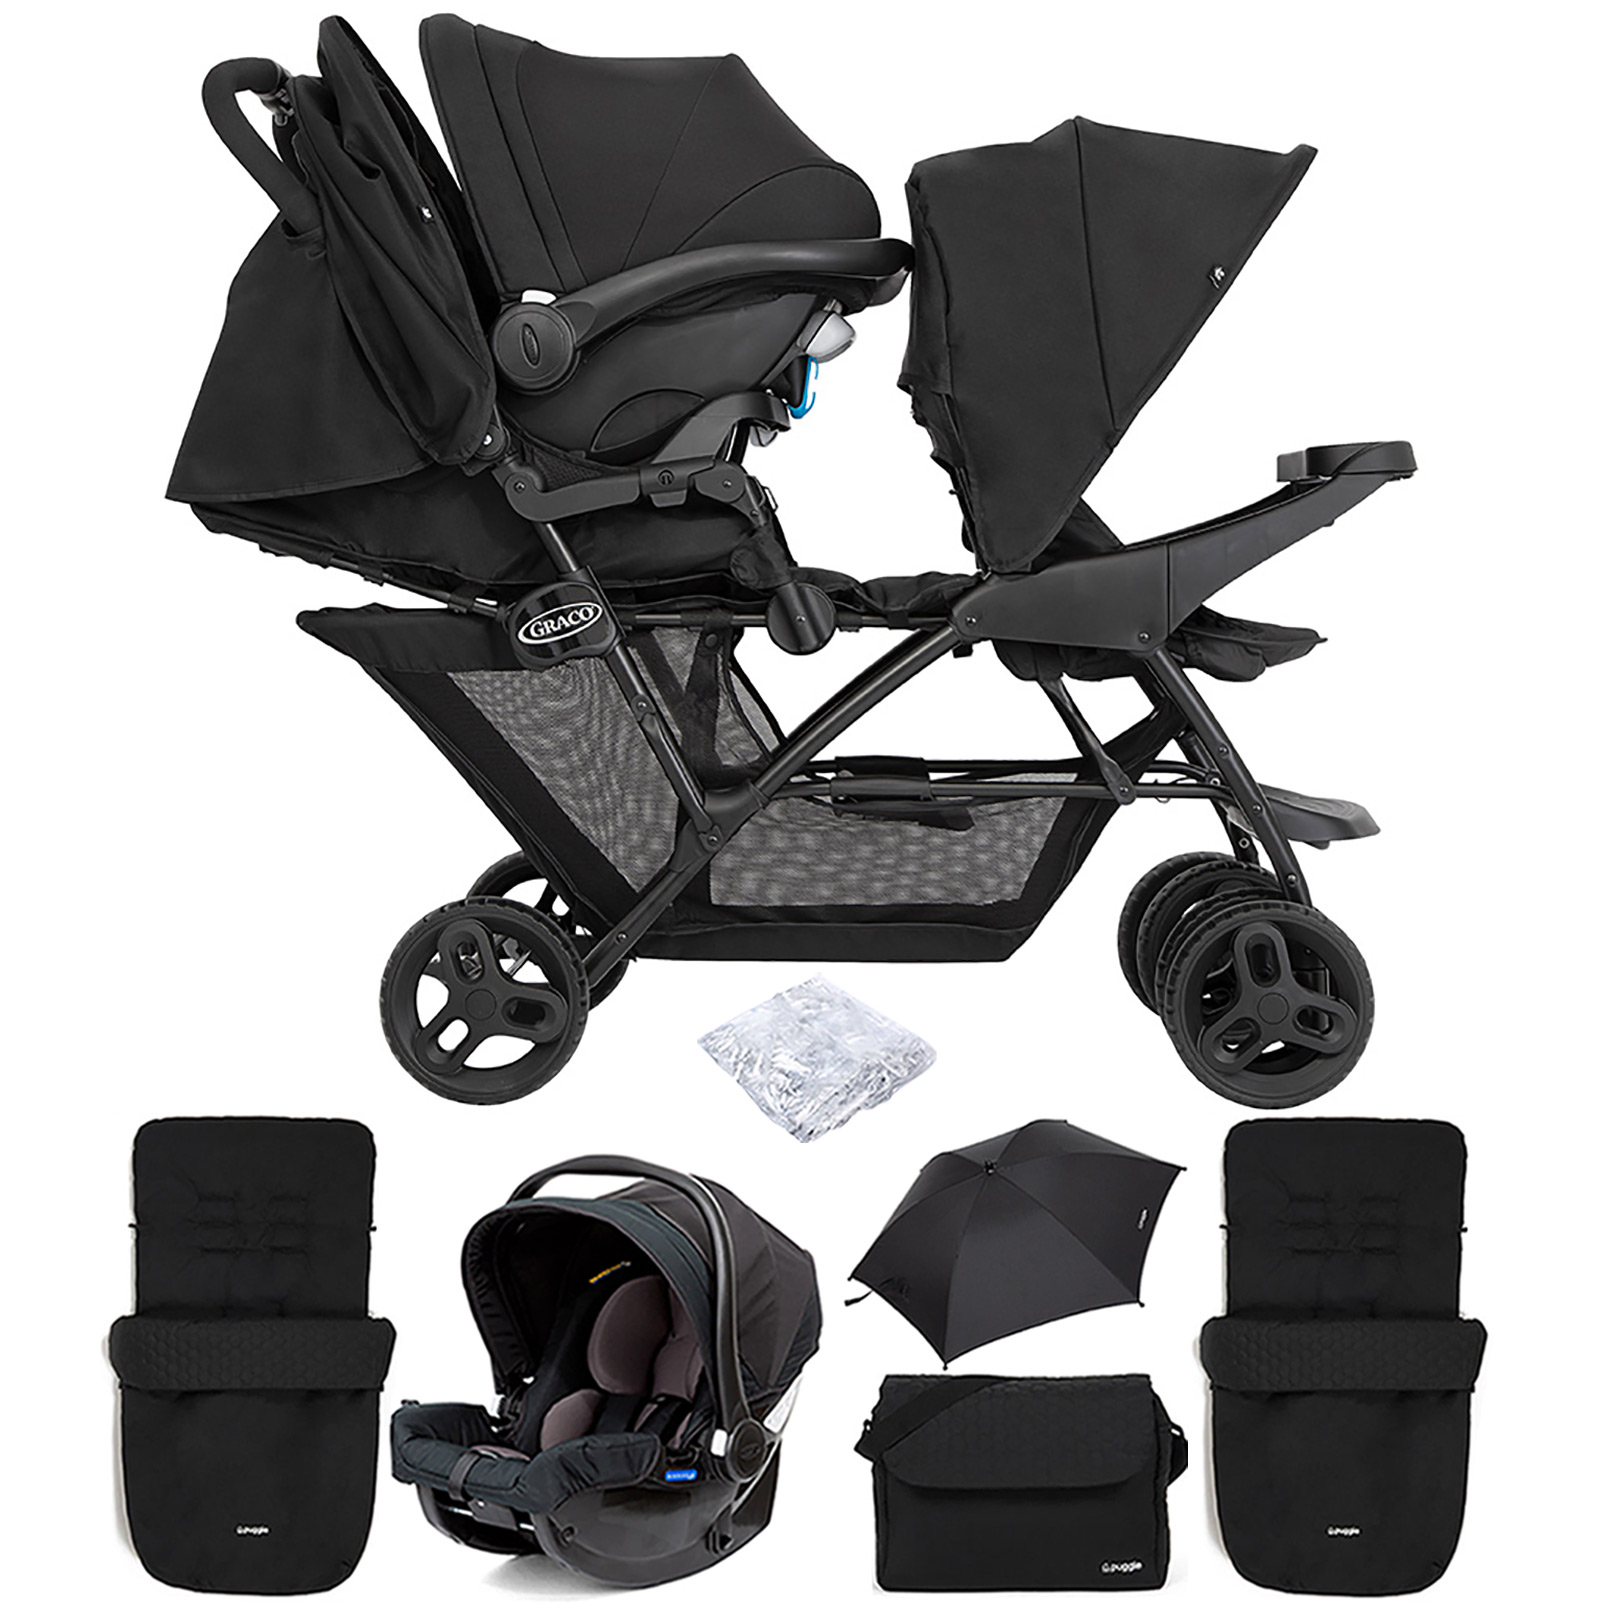 Graco Blaaze™ Stadium Duo Tandem Travel System with Front Apron, Raincover, 2 Footmuffs, Changing Bag, Car Seat & Parasol - Night Sky